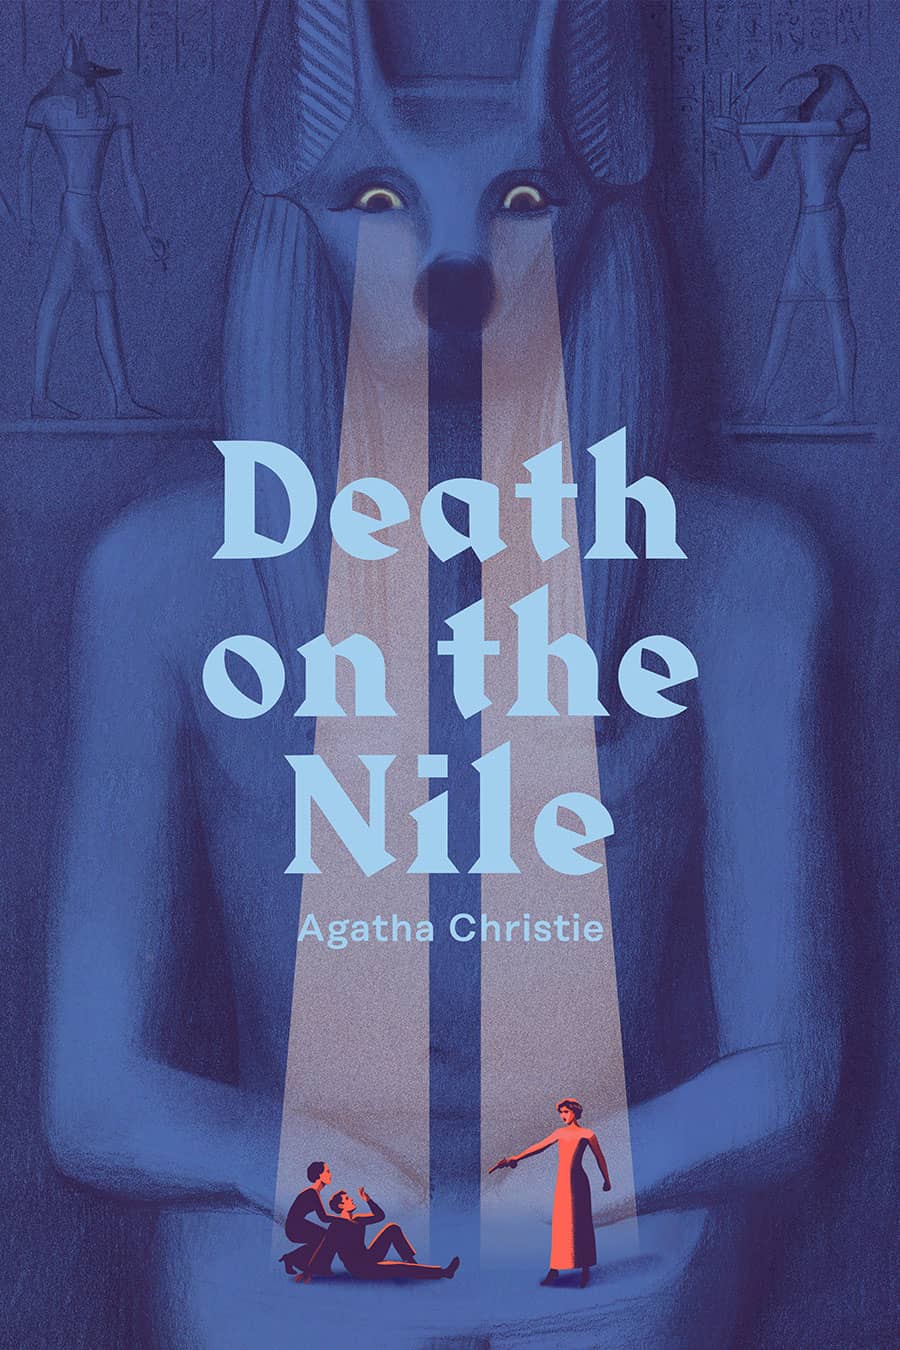 Death on the nile cover illustration